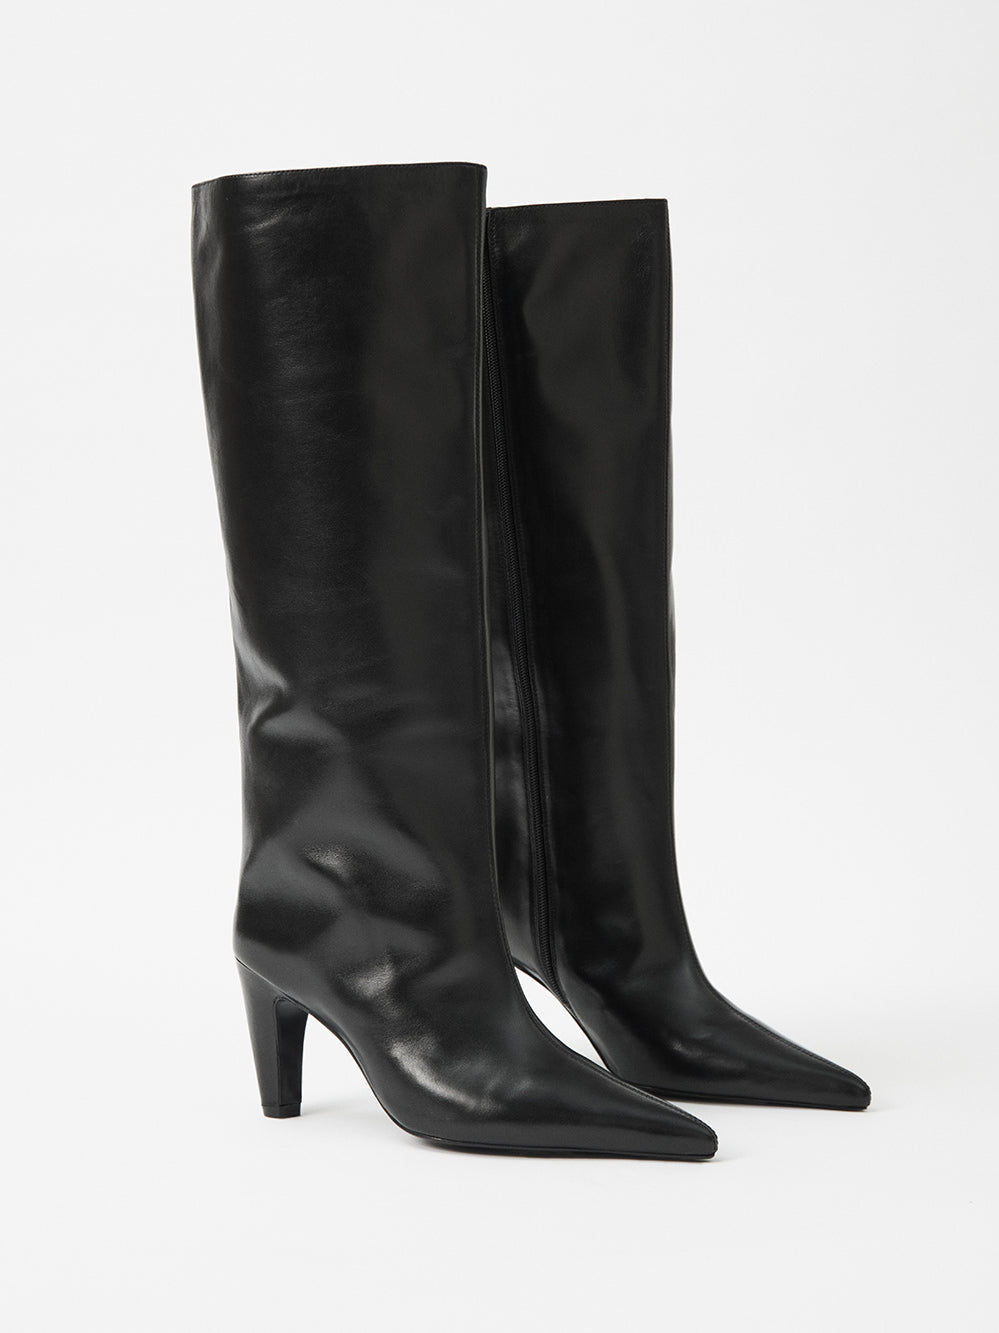 The Vivienne Leather Boot